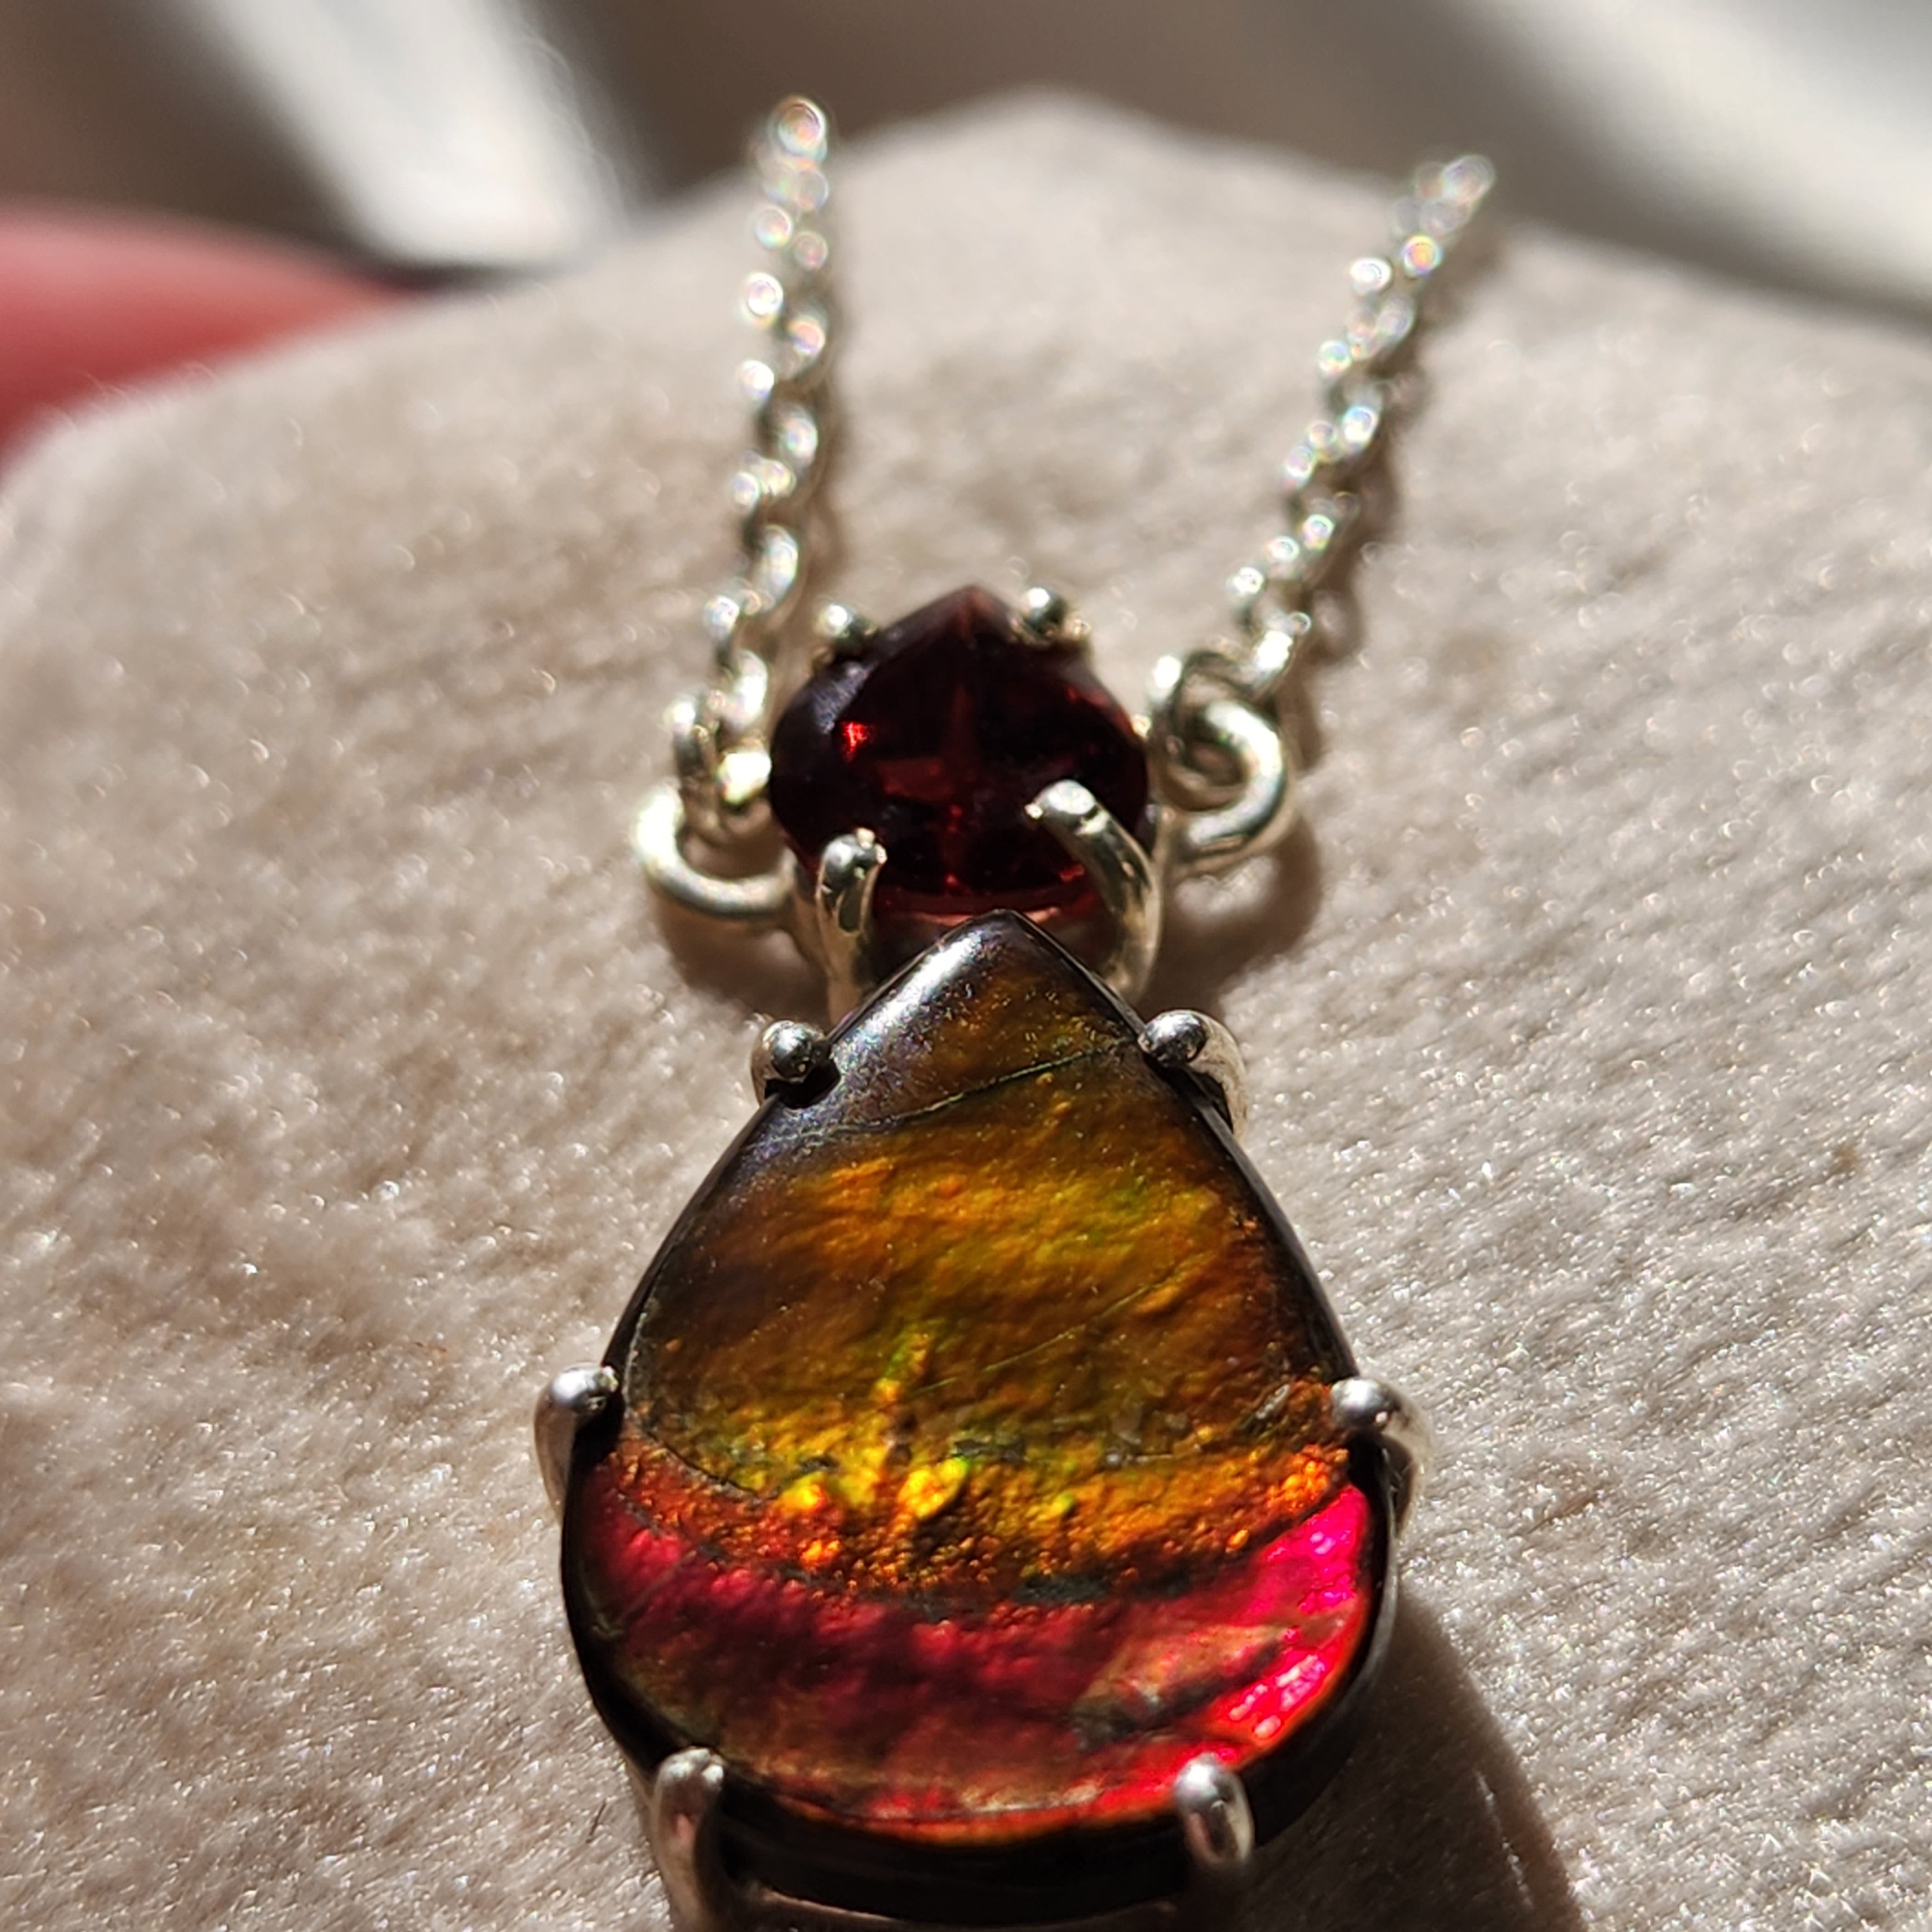 Ammolite x Garnet Necklace .925 Silver for Good Luck, Prosperity and Protection